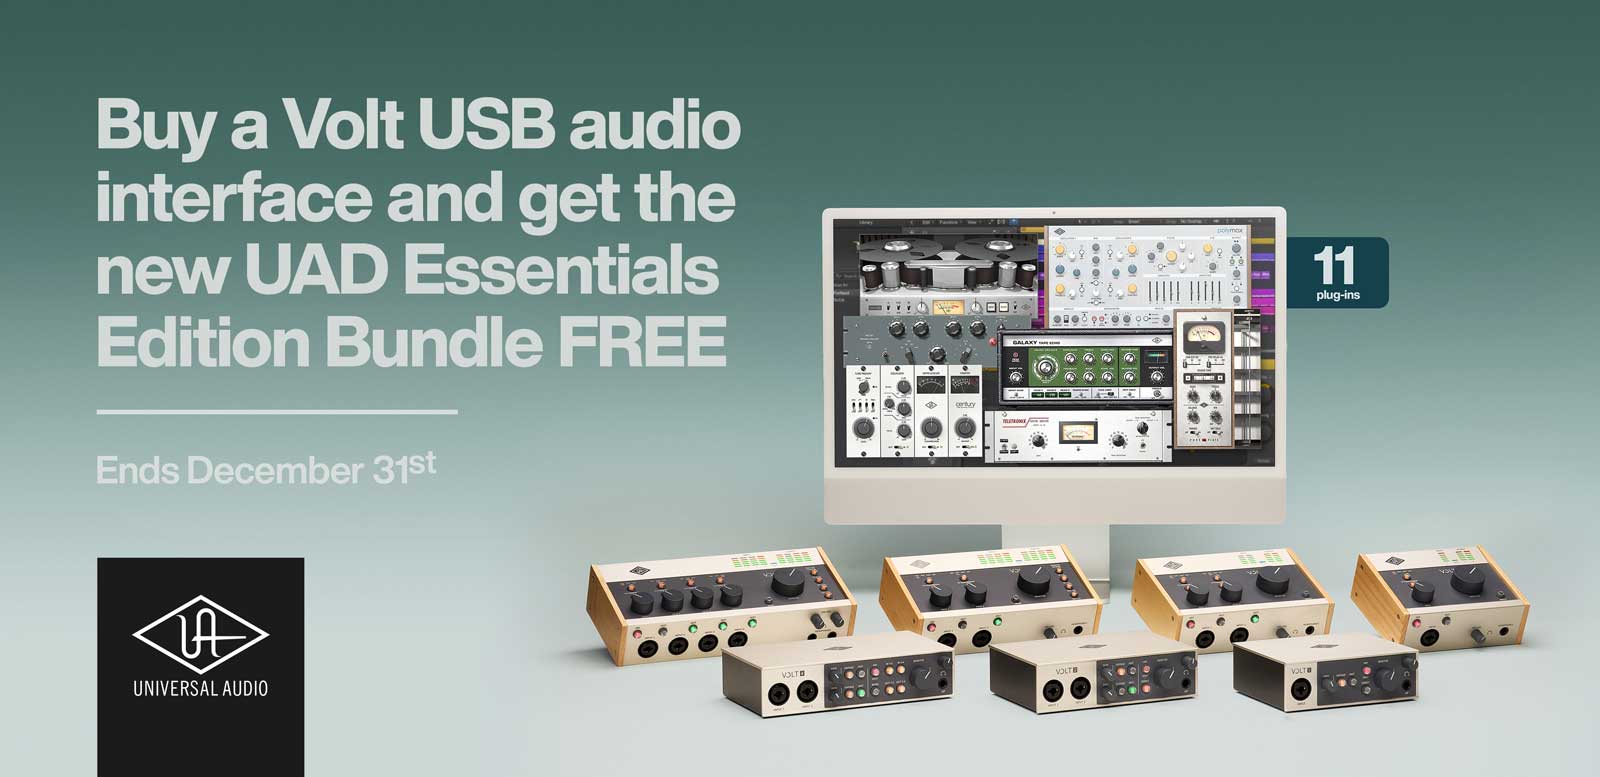 Get the New UAD Essentials Edition bundle FREE When you buy any Volt USB Audio Interface